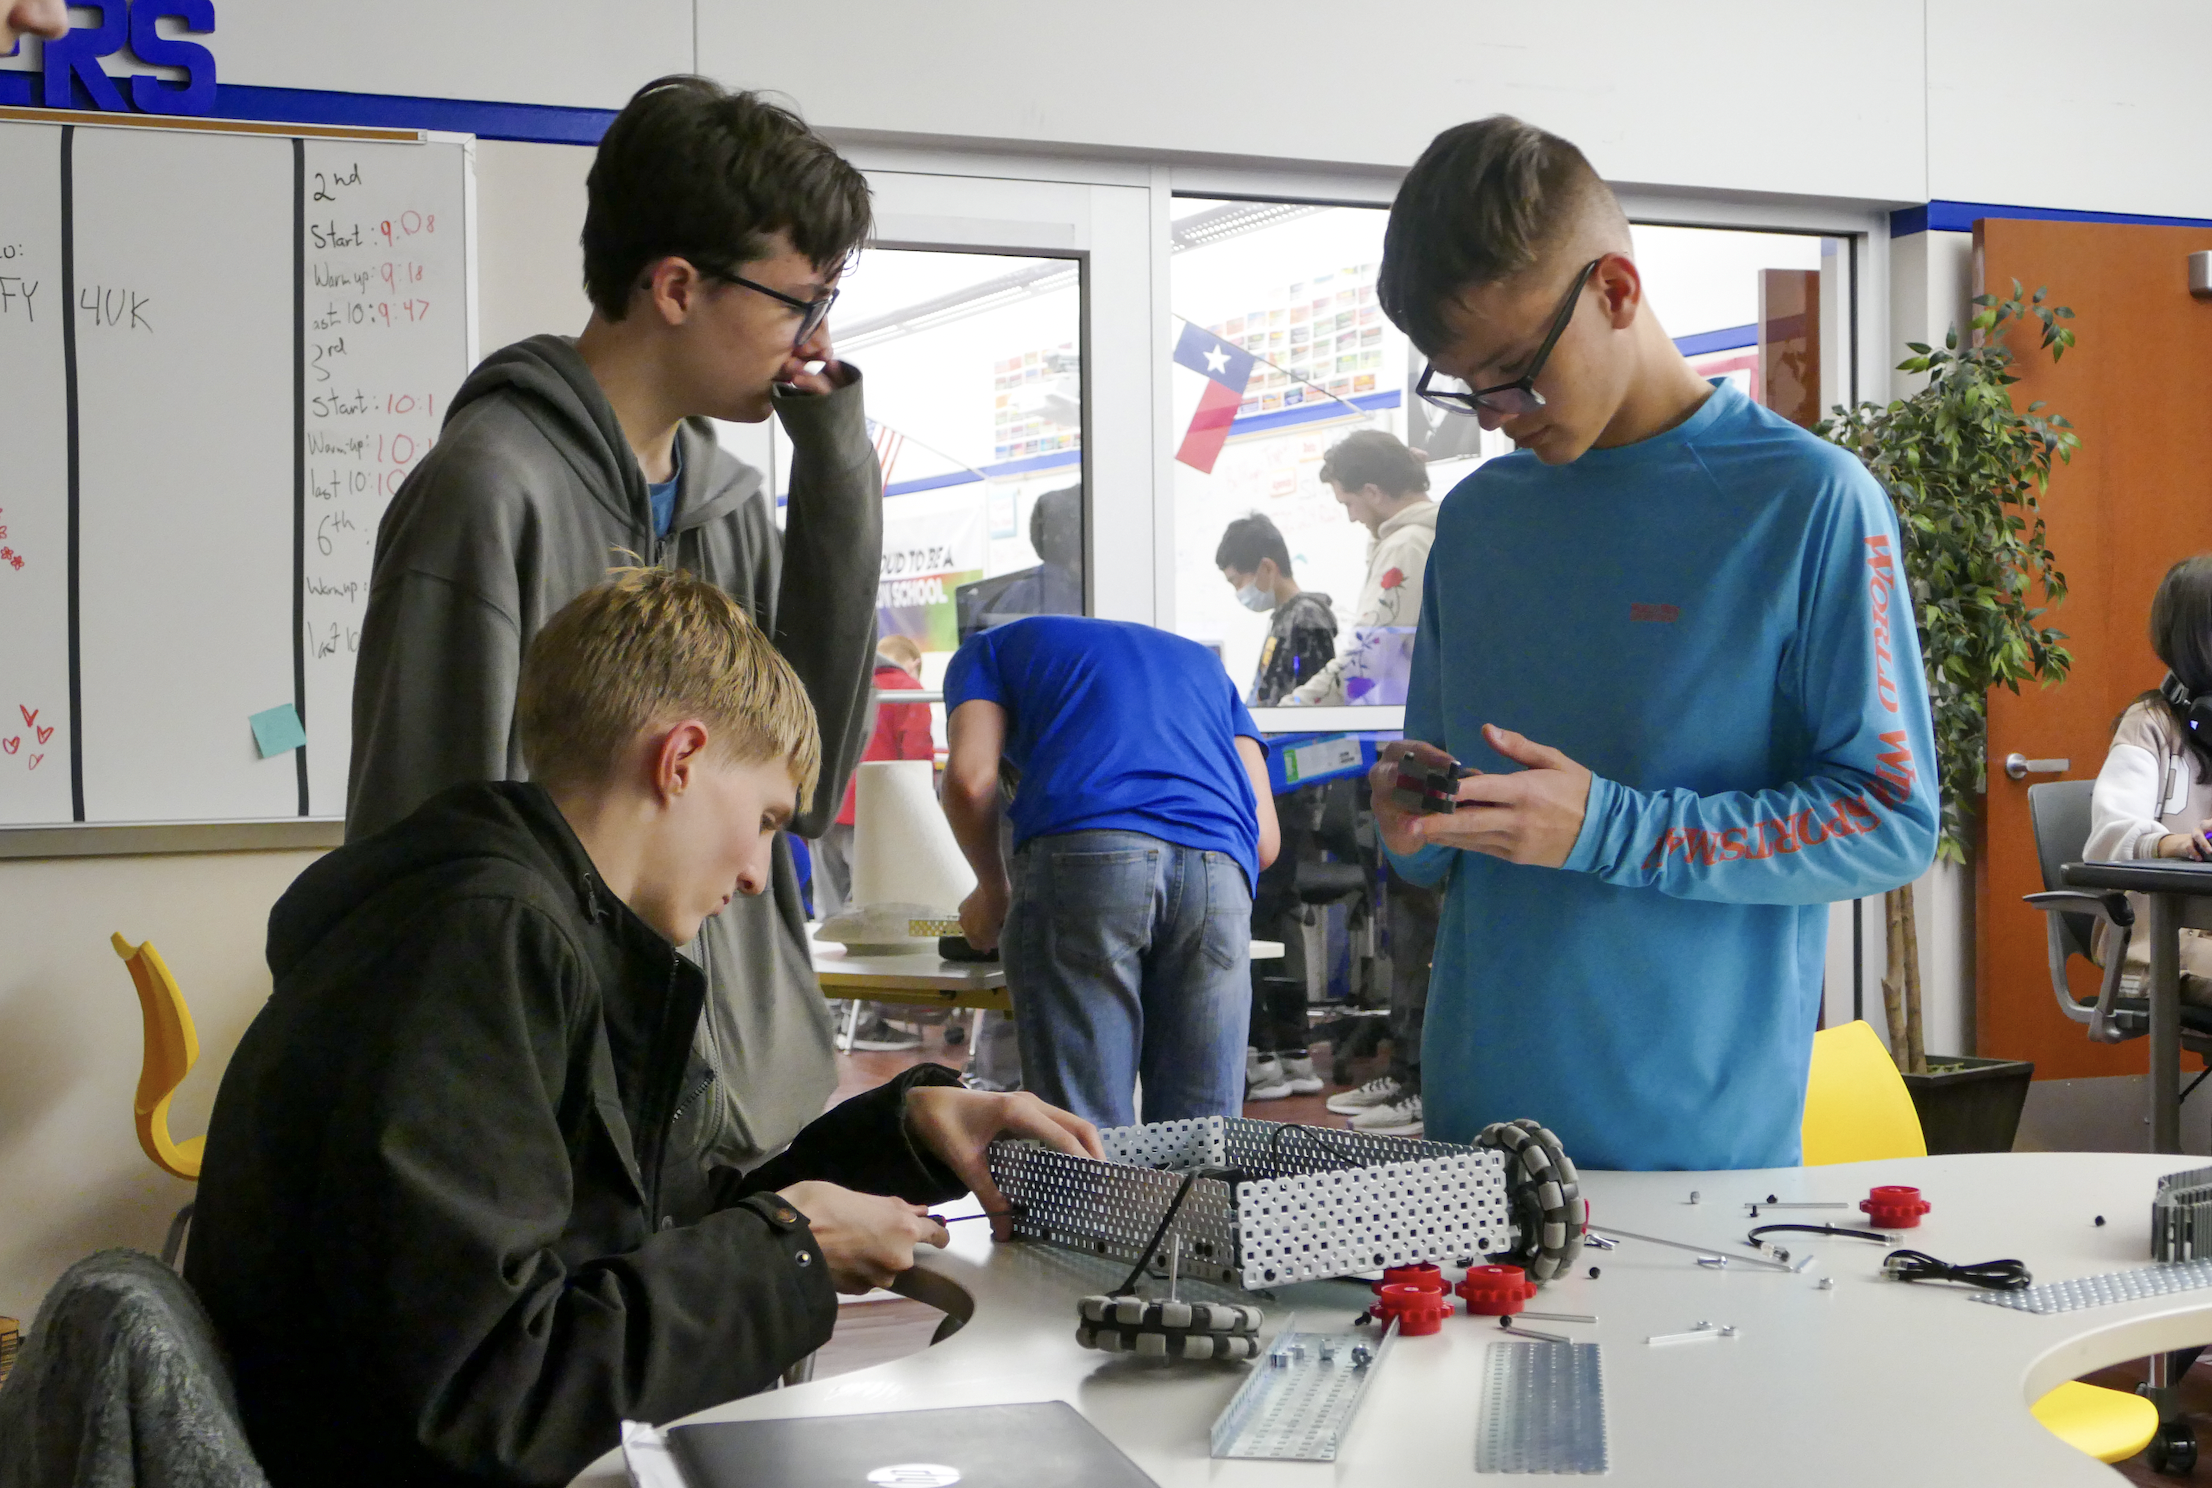 A group of students in a STEM class work on a project that looks to be a form of robotics.